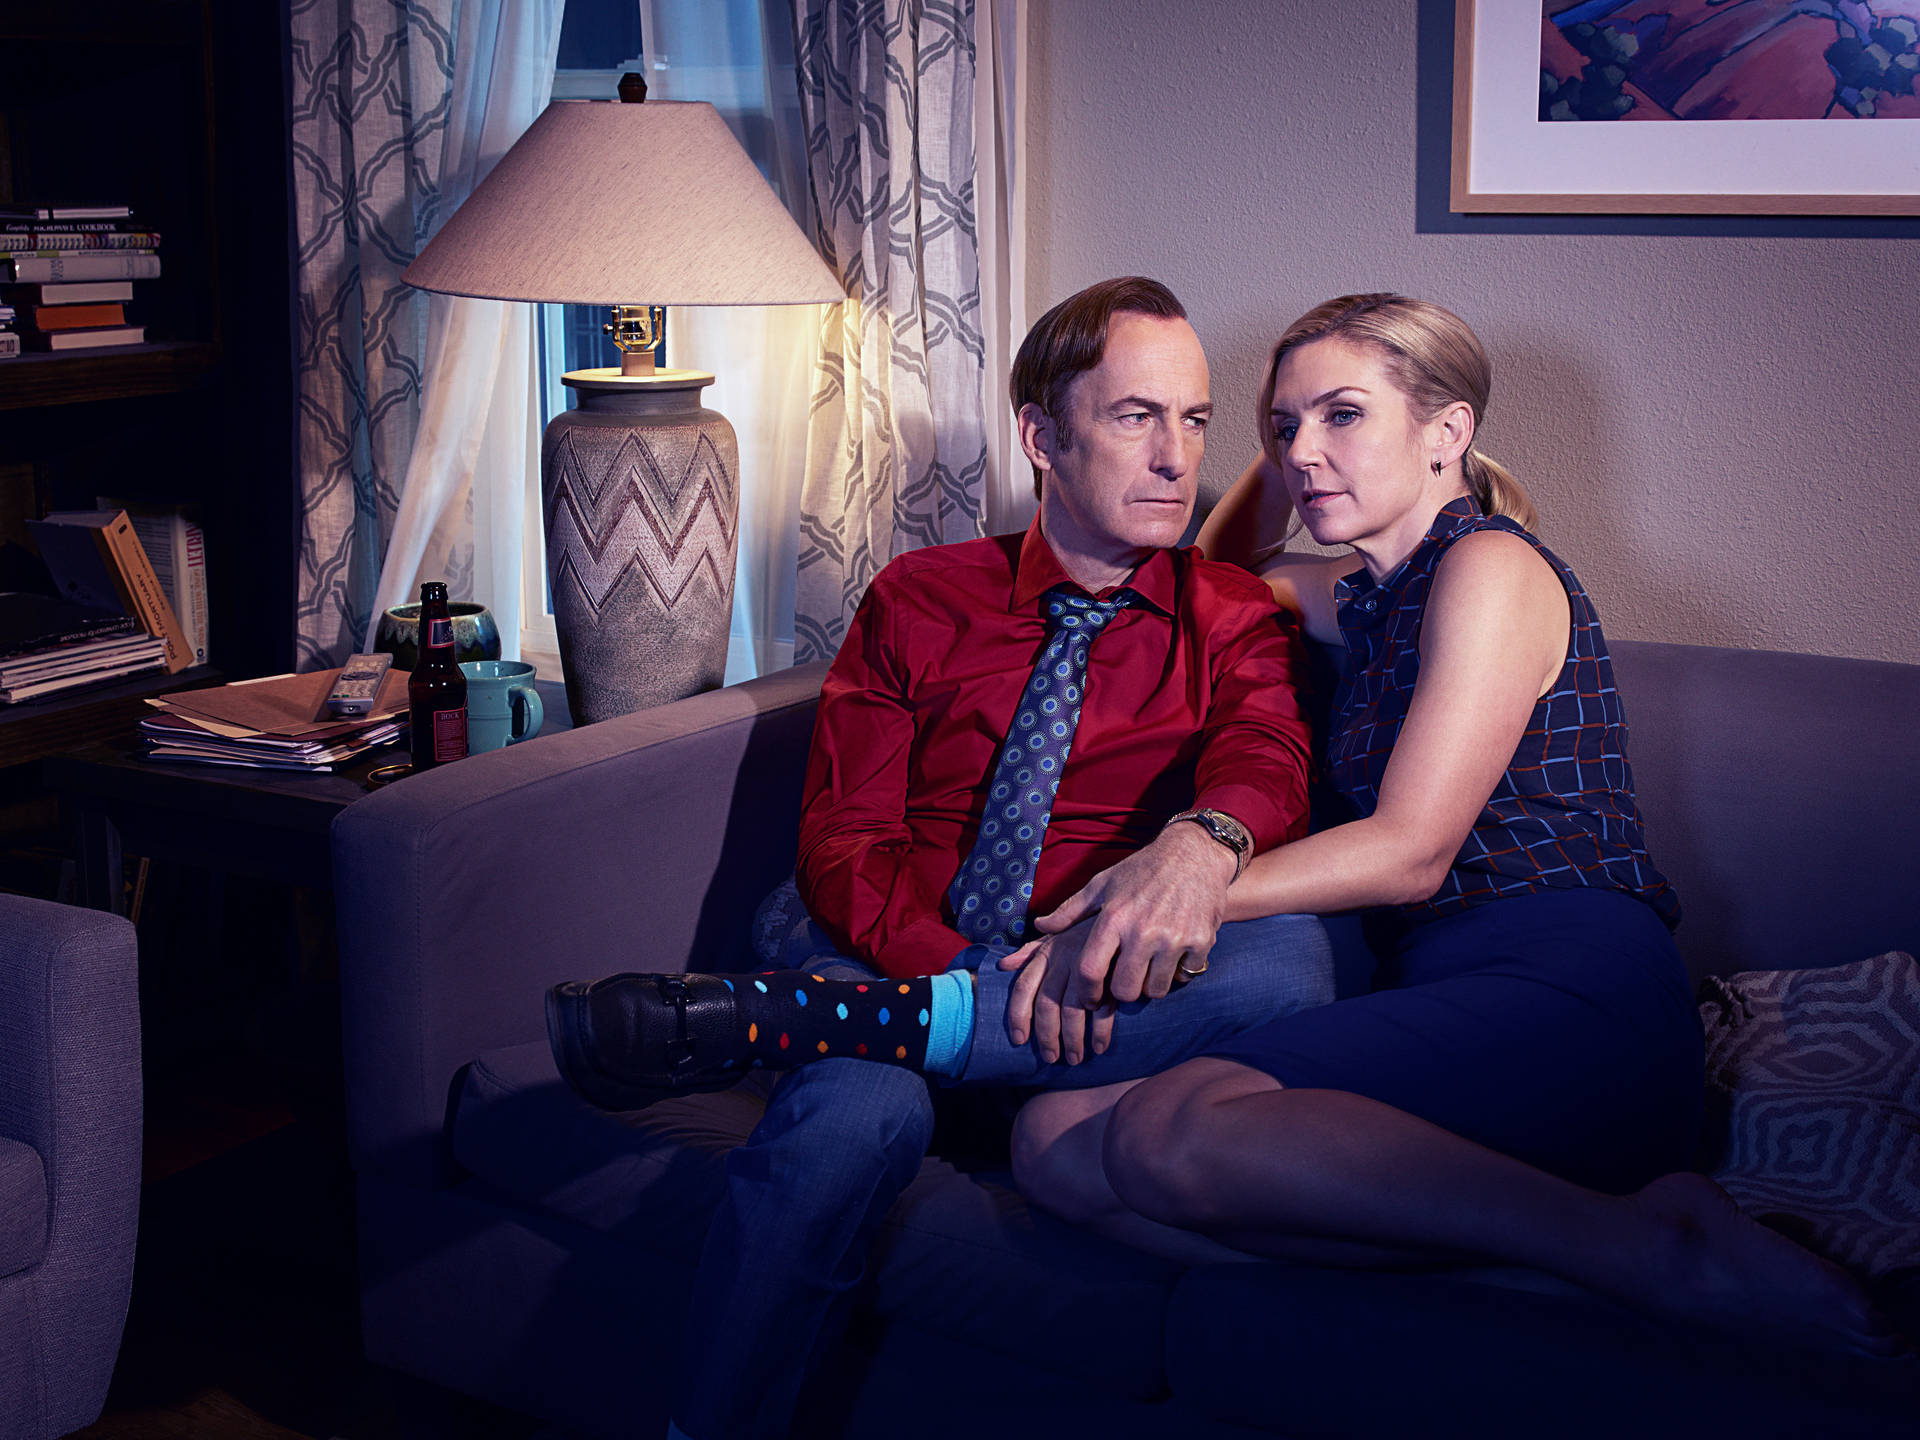 Caption: A pivotal moment between Jimmy McGill and his partner, Kim Wexler, in Better Call Saul. Wallpaper